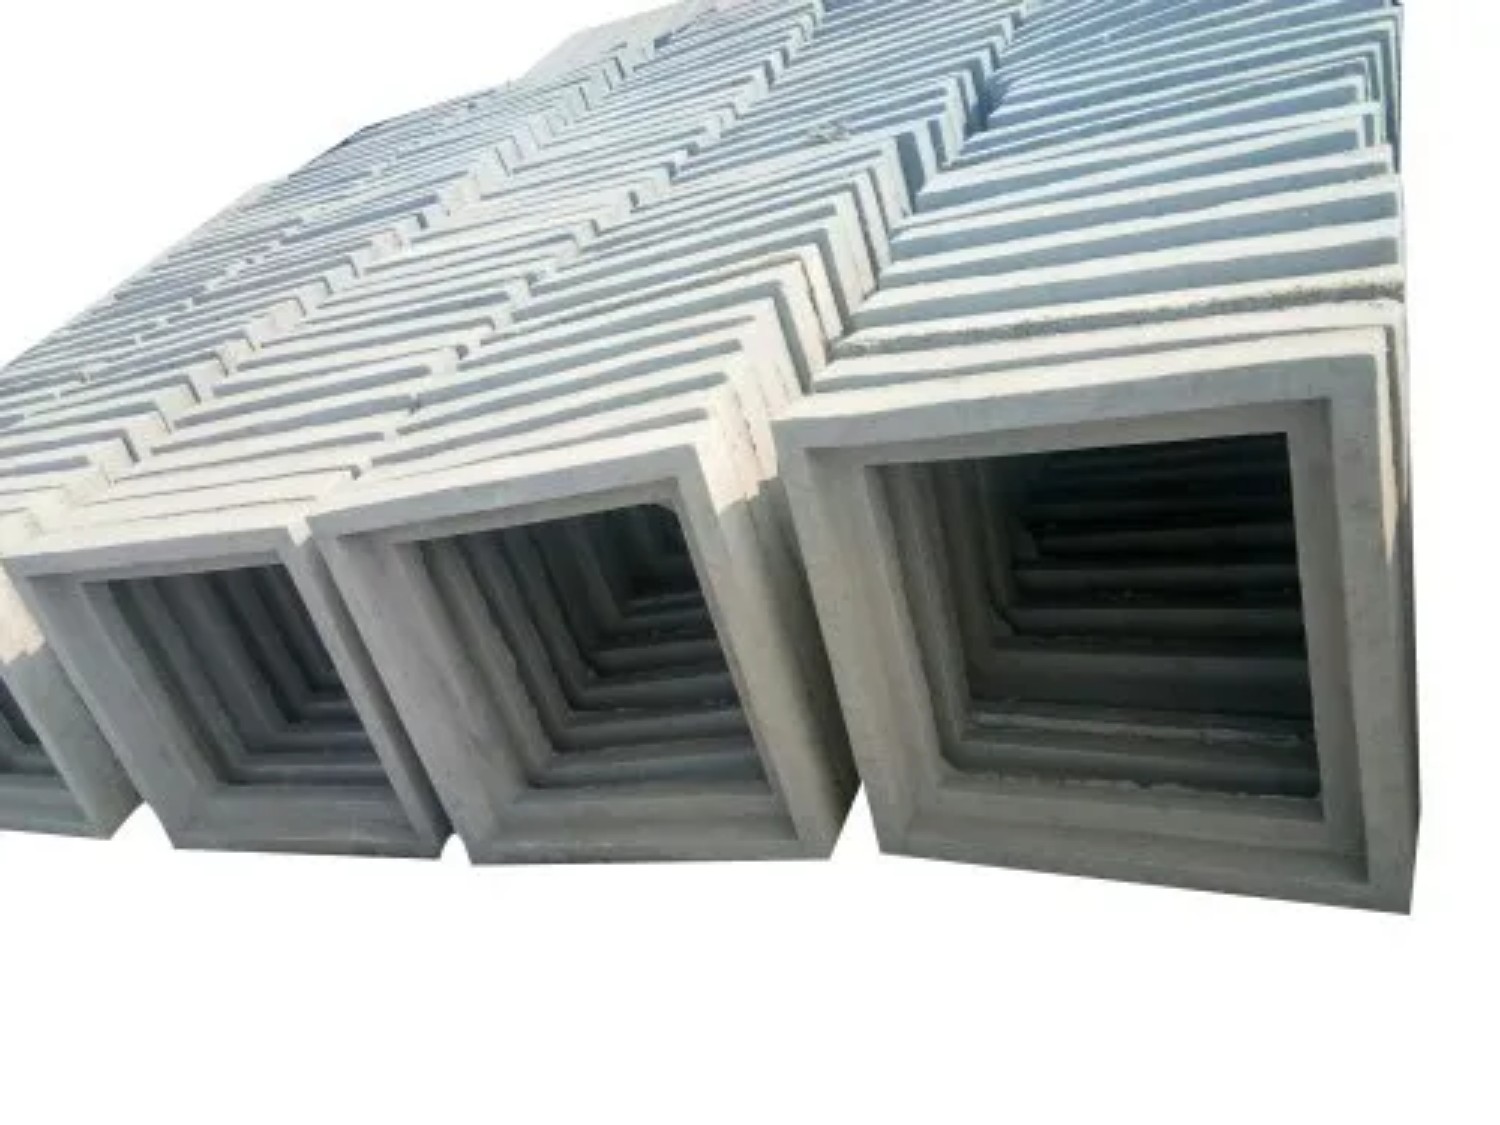 Fiable Concrete Square Chamber Drain Cover Frame MD-10_0